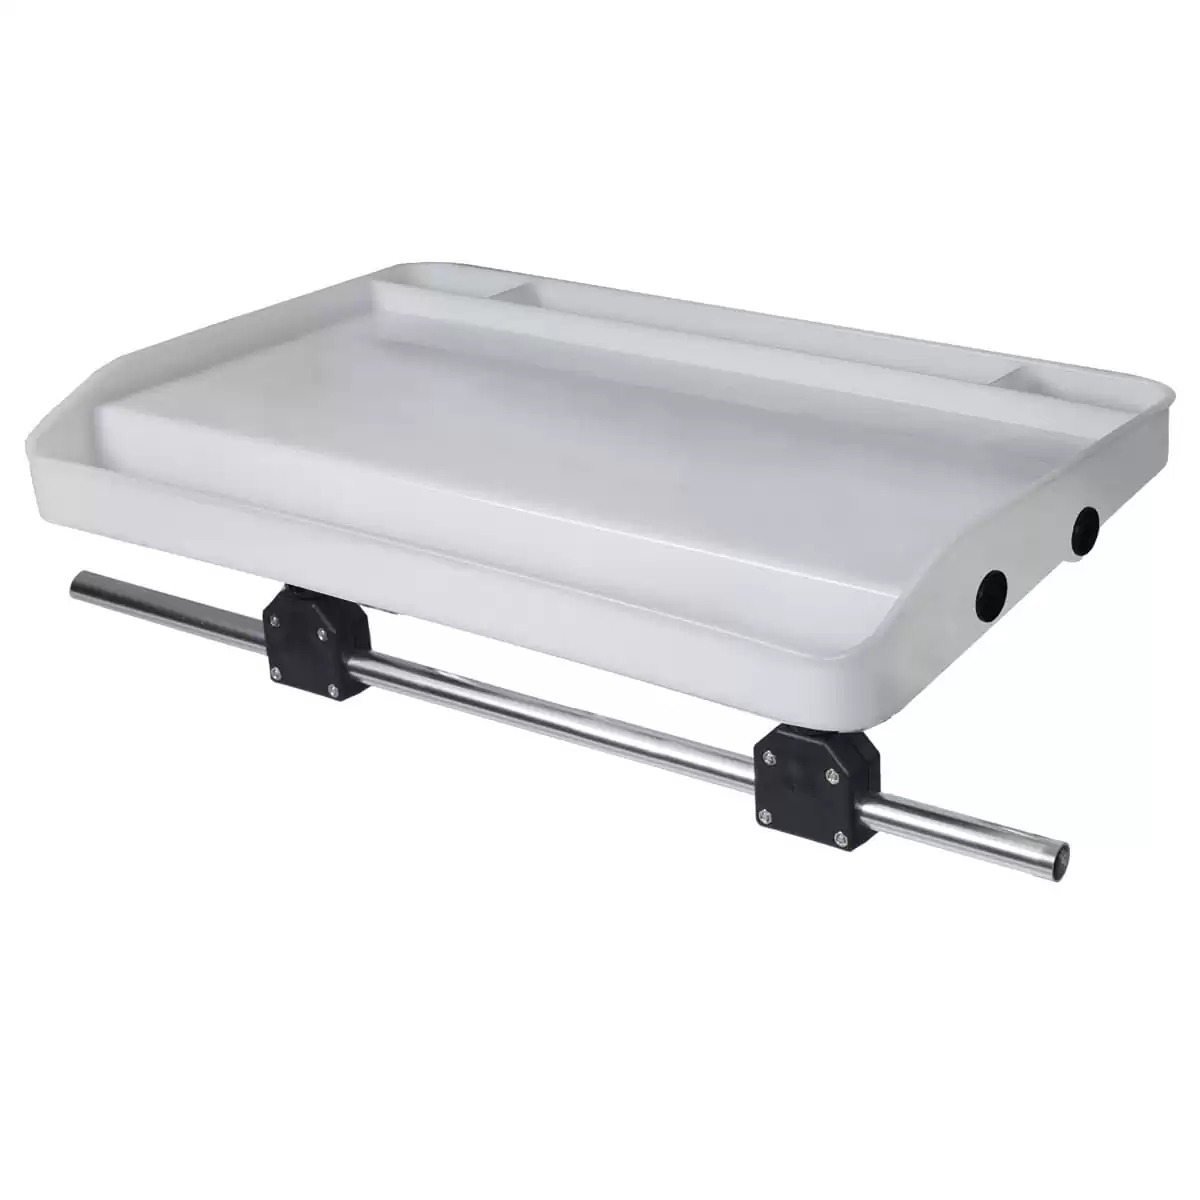 Large Rail Mounted Bait Cutting Board With Tackle Compartments